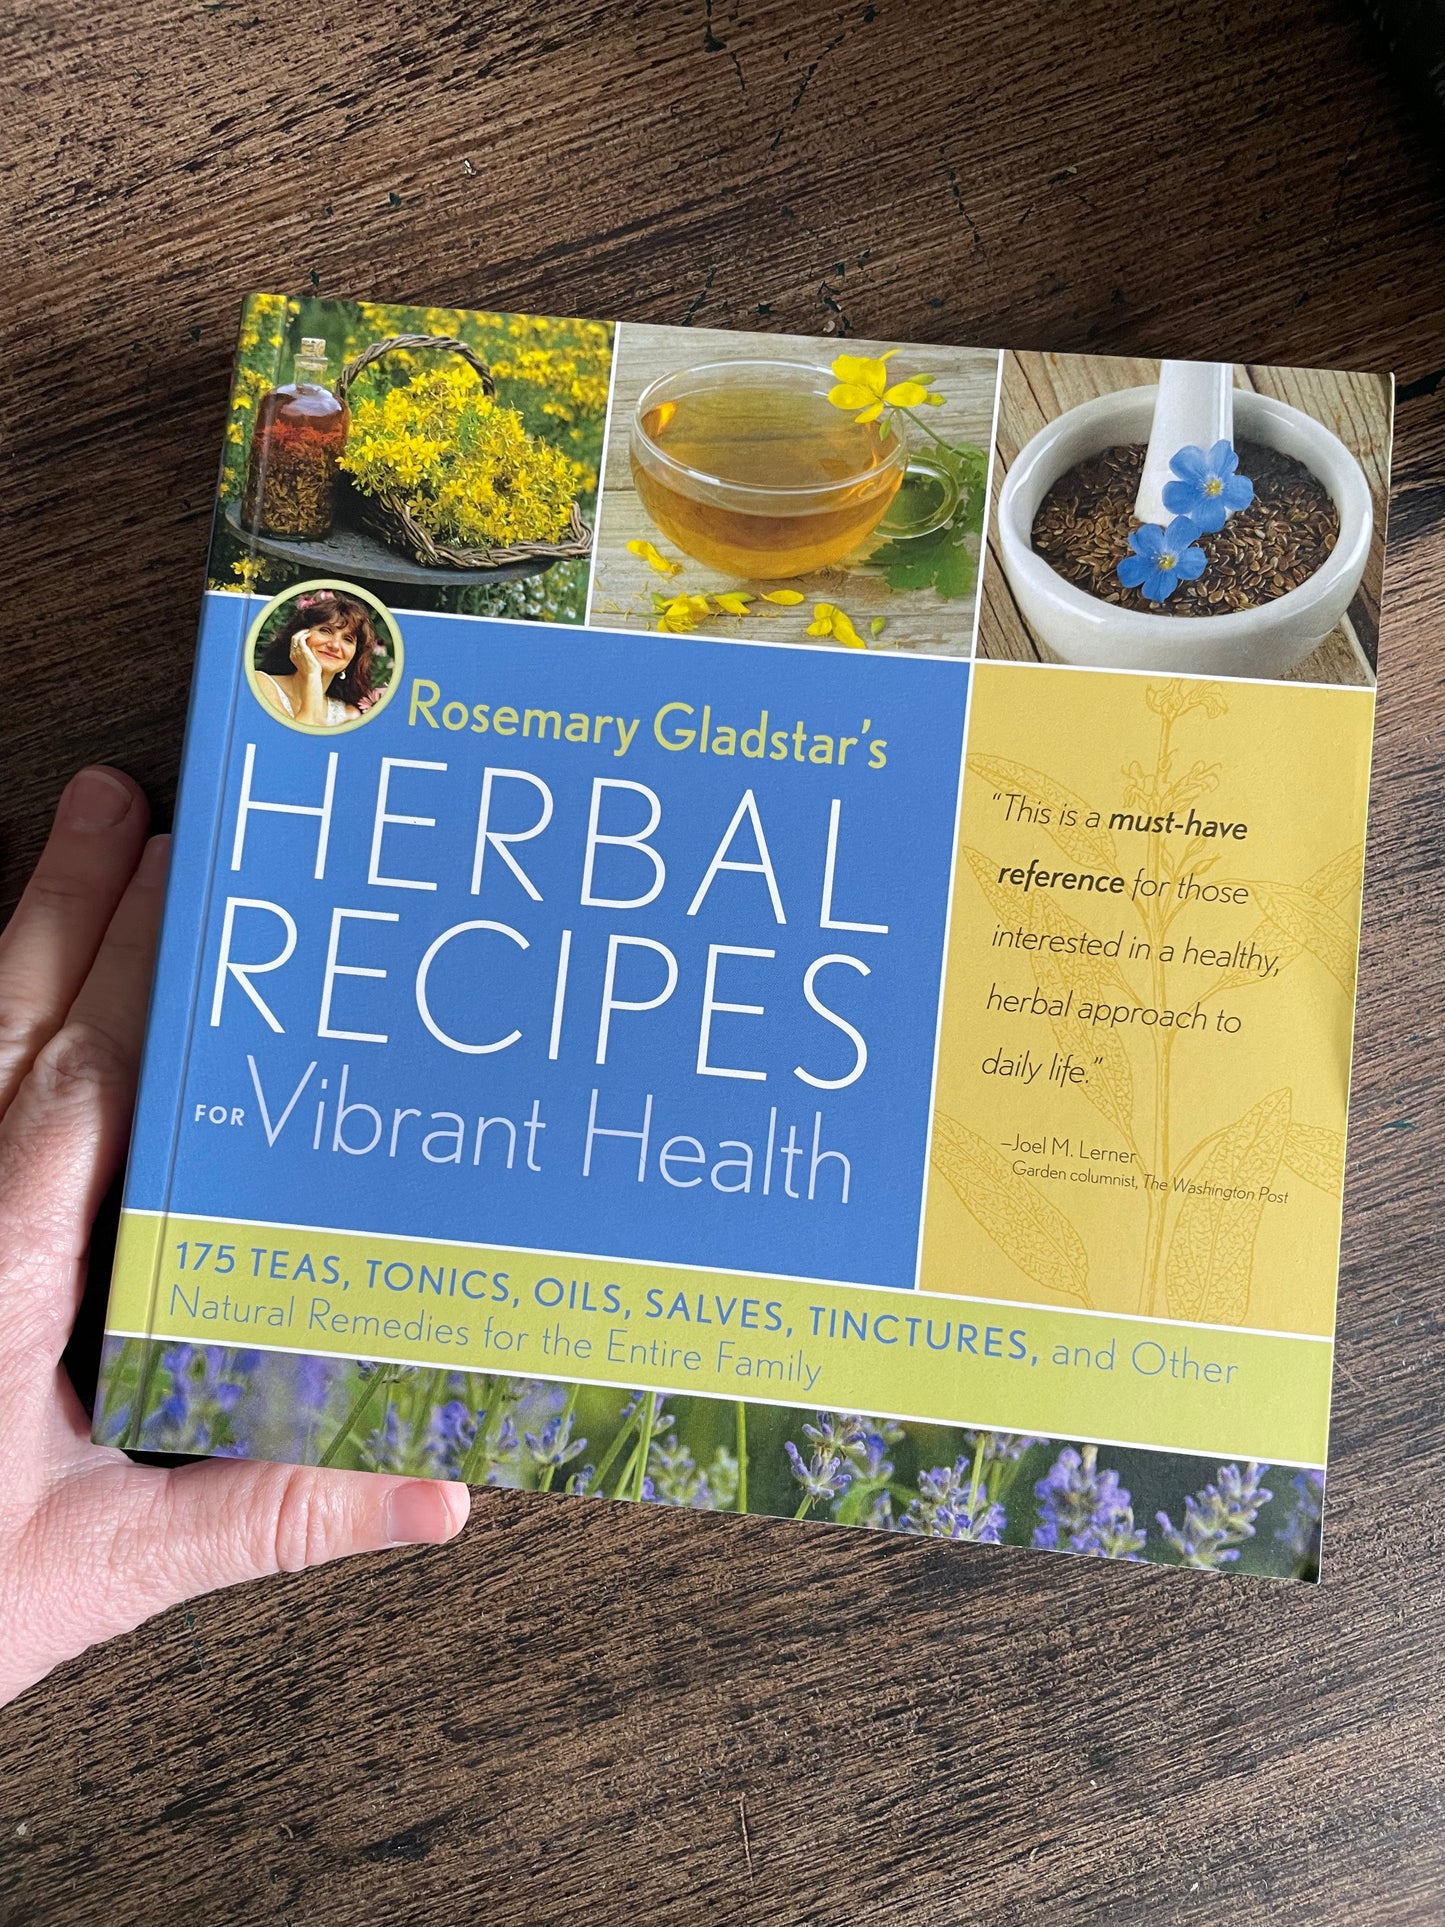 Rosemary Gladstar's Herbal Remedies for Vibrant Health